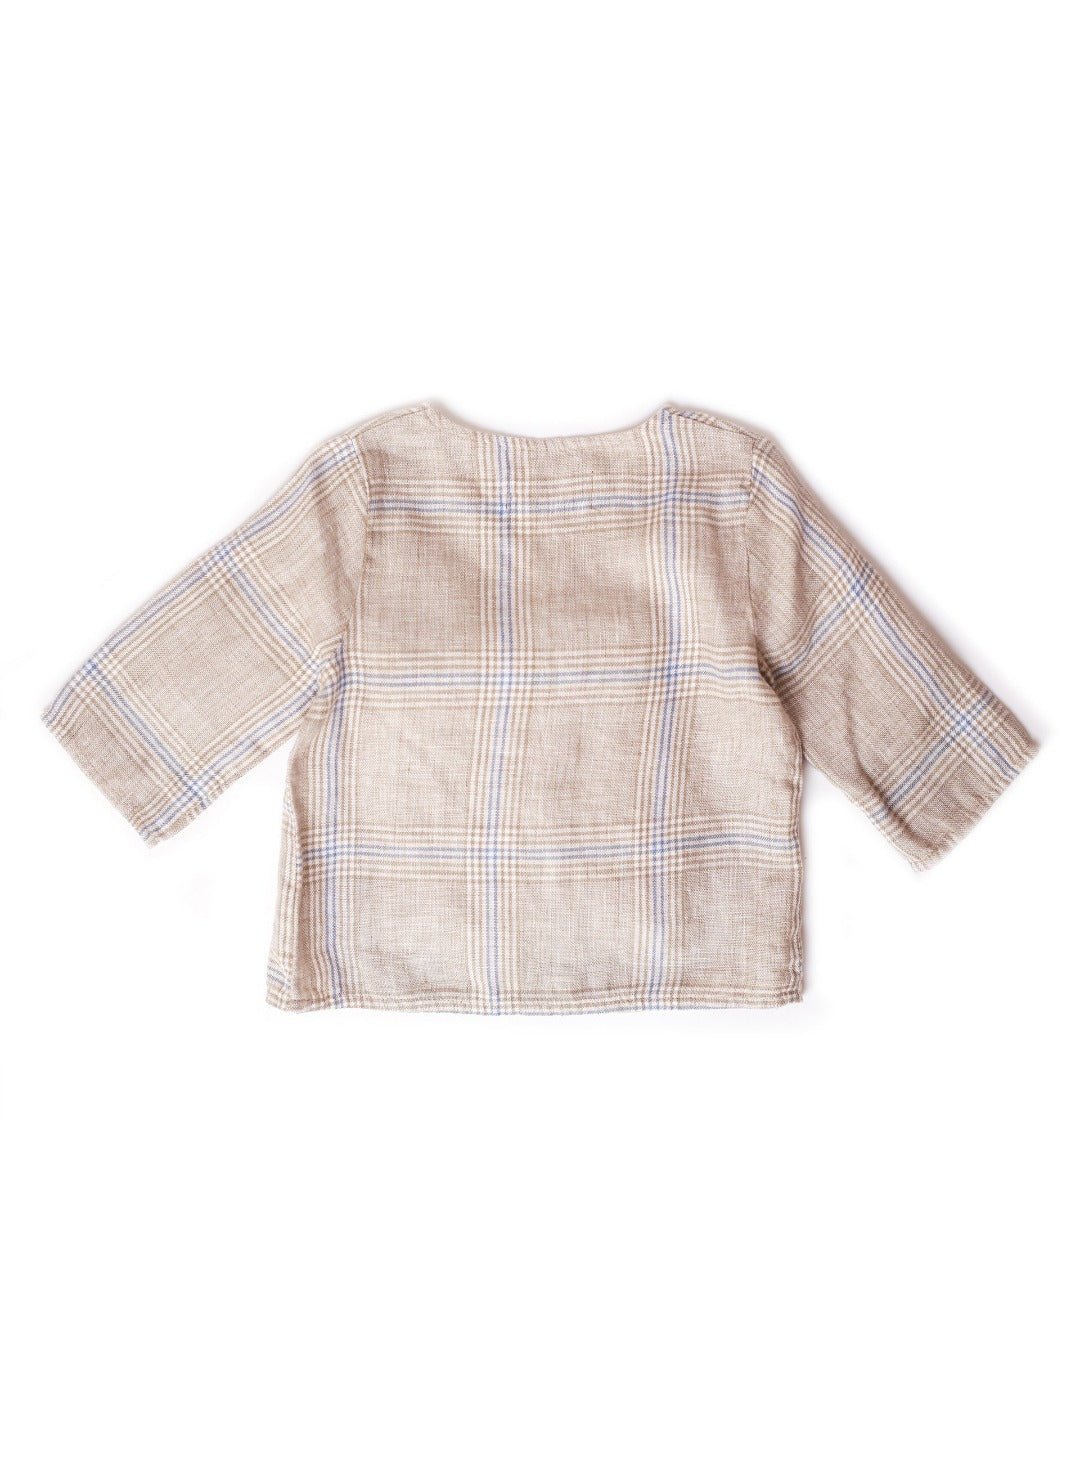 brown oatmeal checked jacket